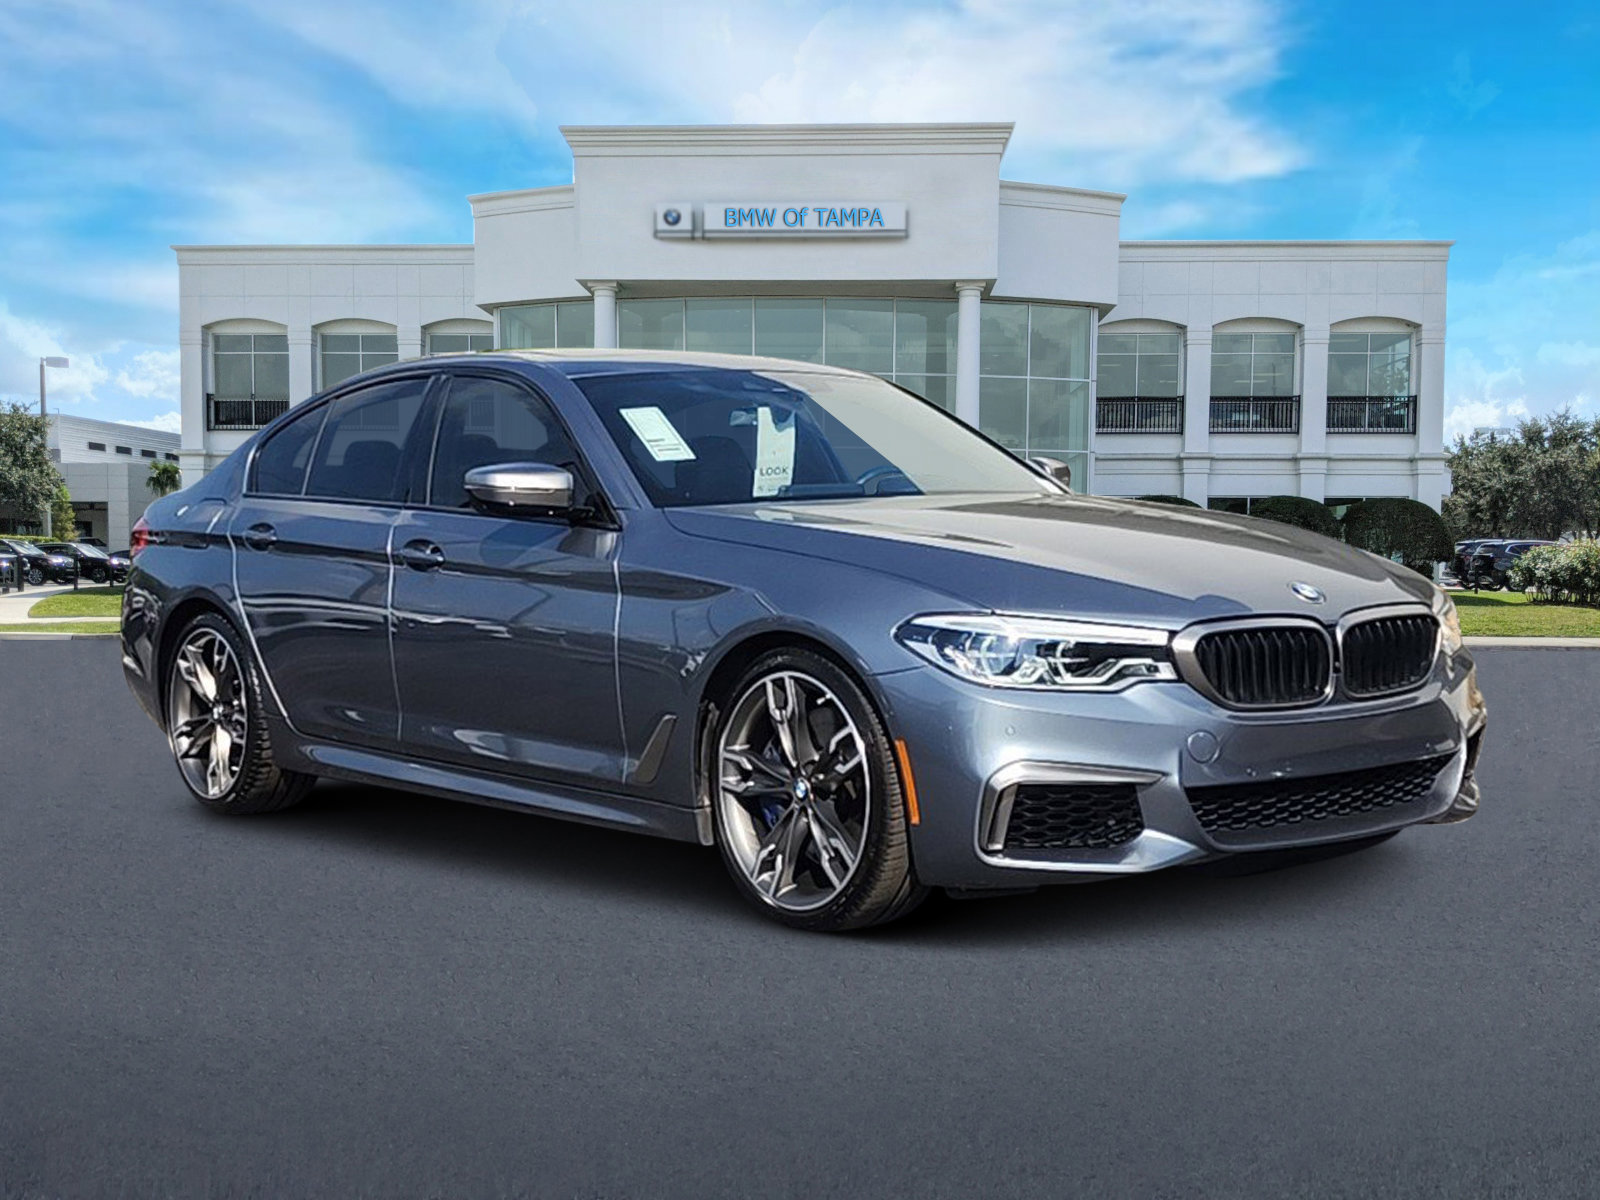 Used 2020 BMW M550i xDrive for Sale in Clearwater, FL (Test Drive at Home)  - Kelley Blue Book